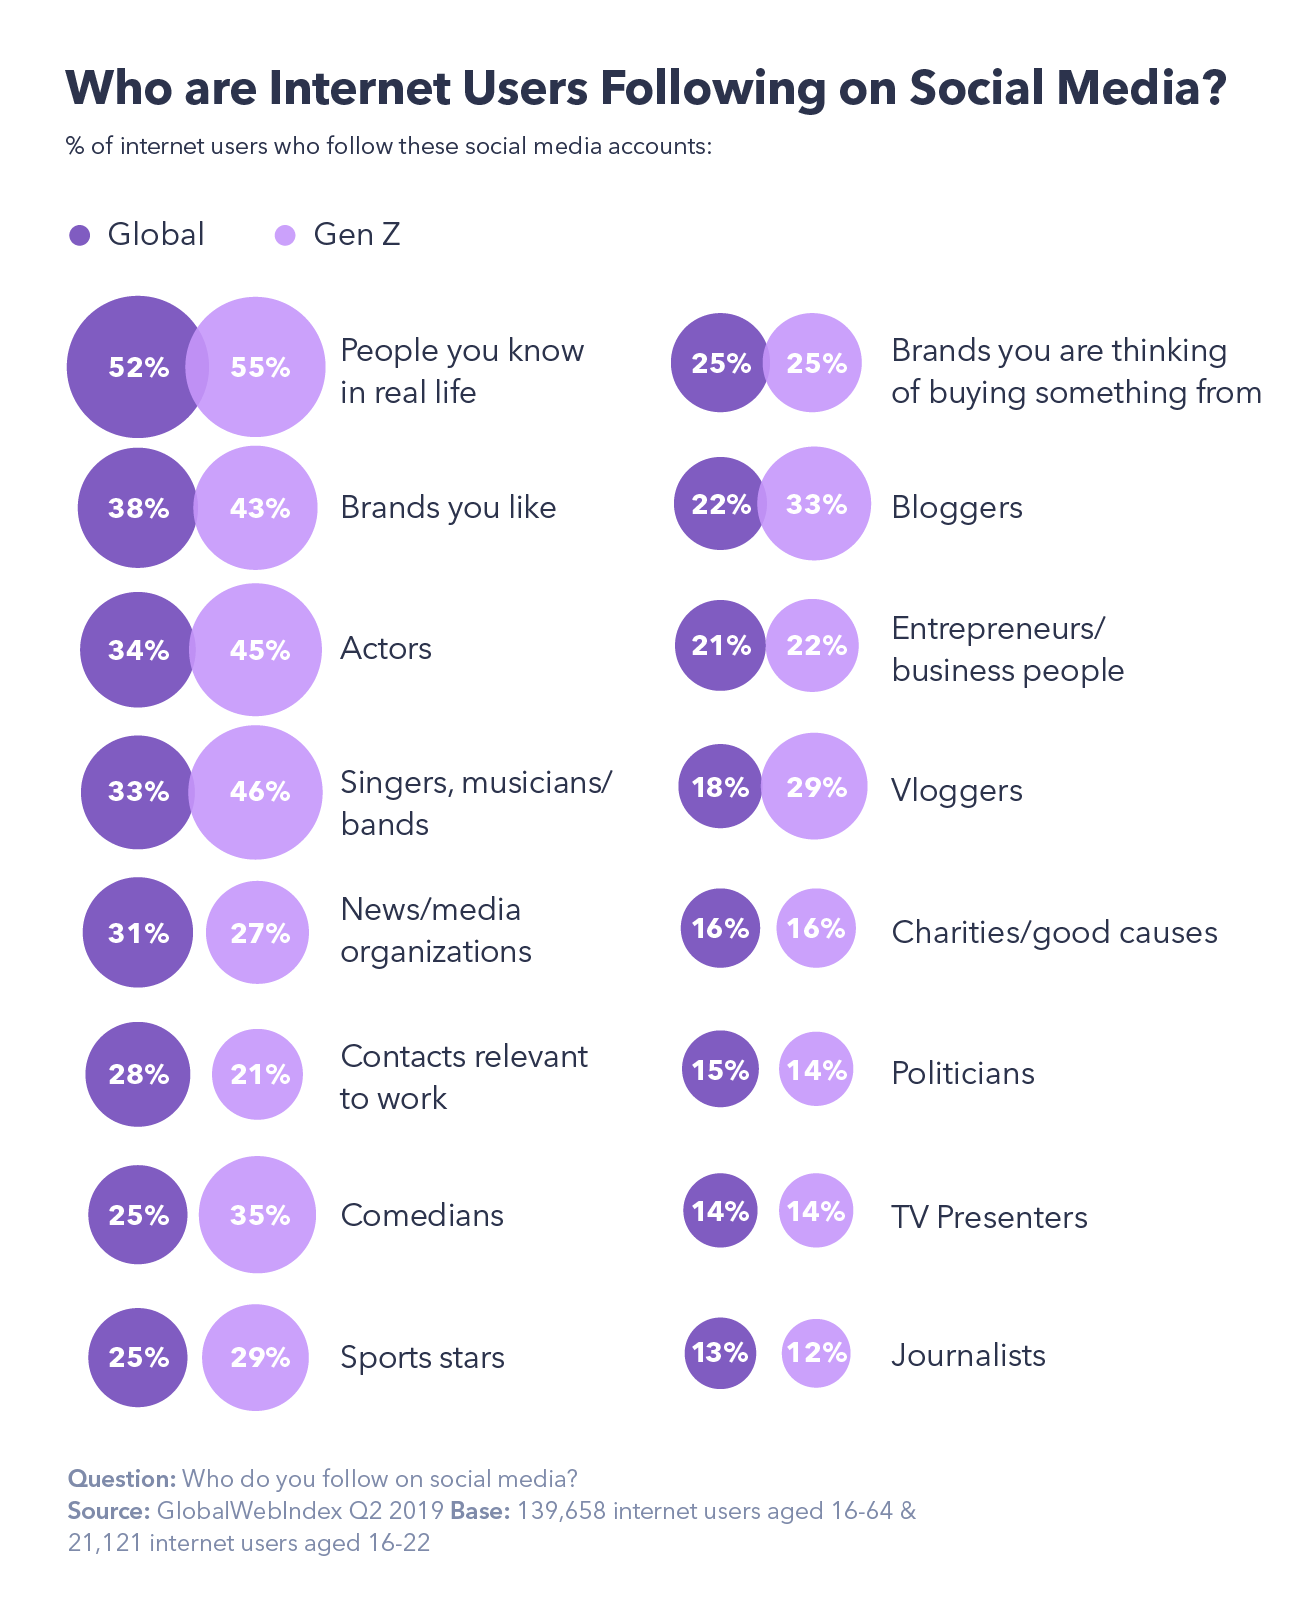 Who are internet users are following on social media